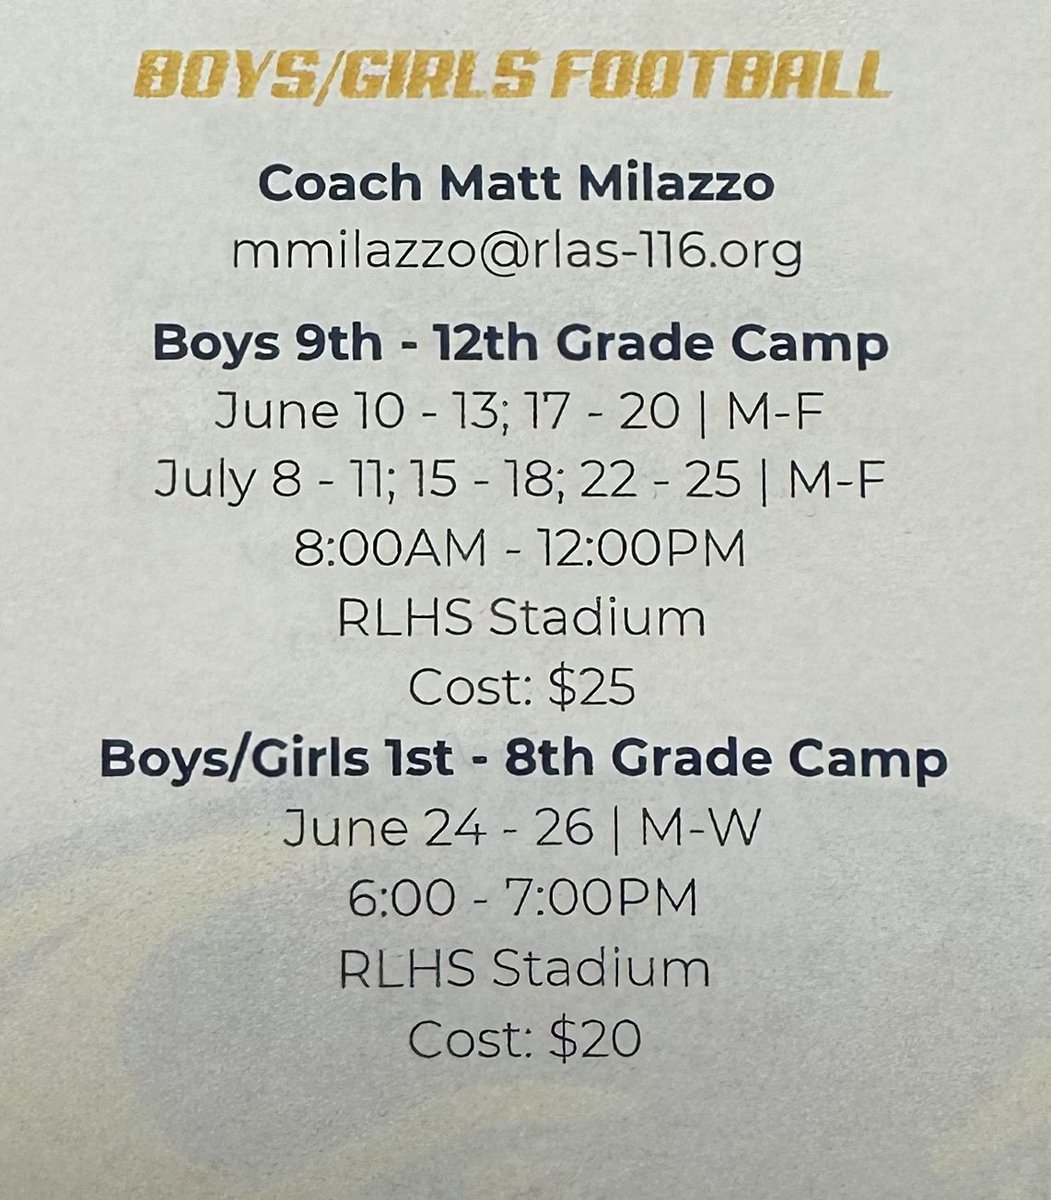 Football Summer Camp dates! Save the dates, spread the word and sign up! docs.google.com/forms/d/1C-bVc… #summercamp #keepbuilding